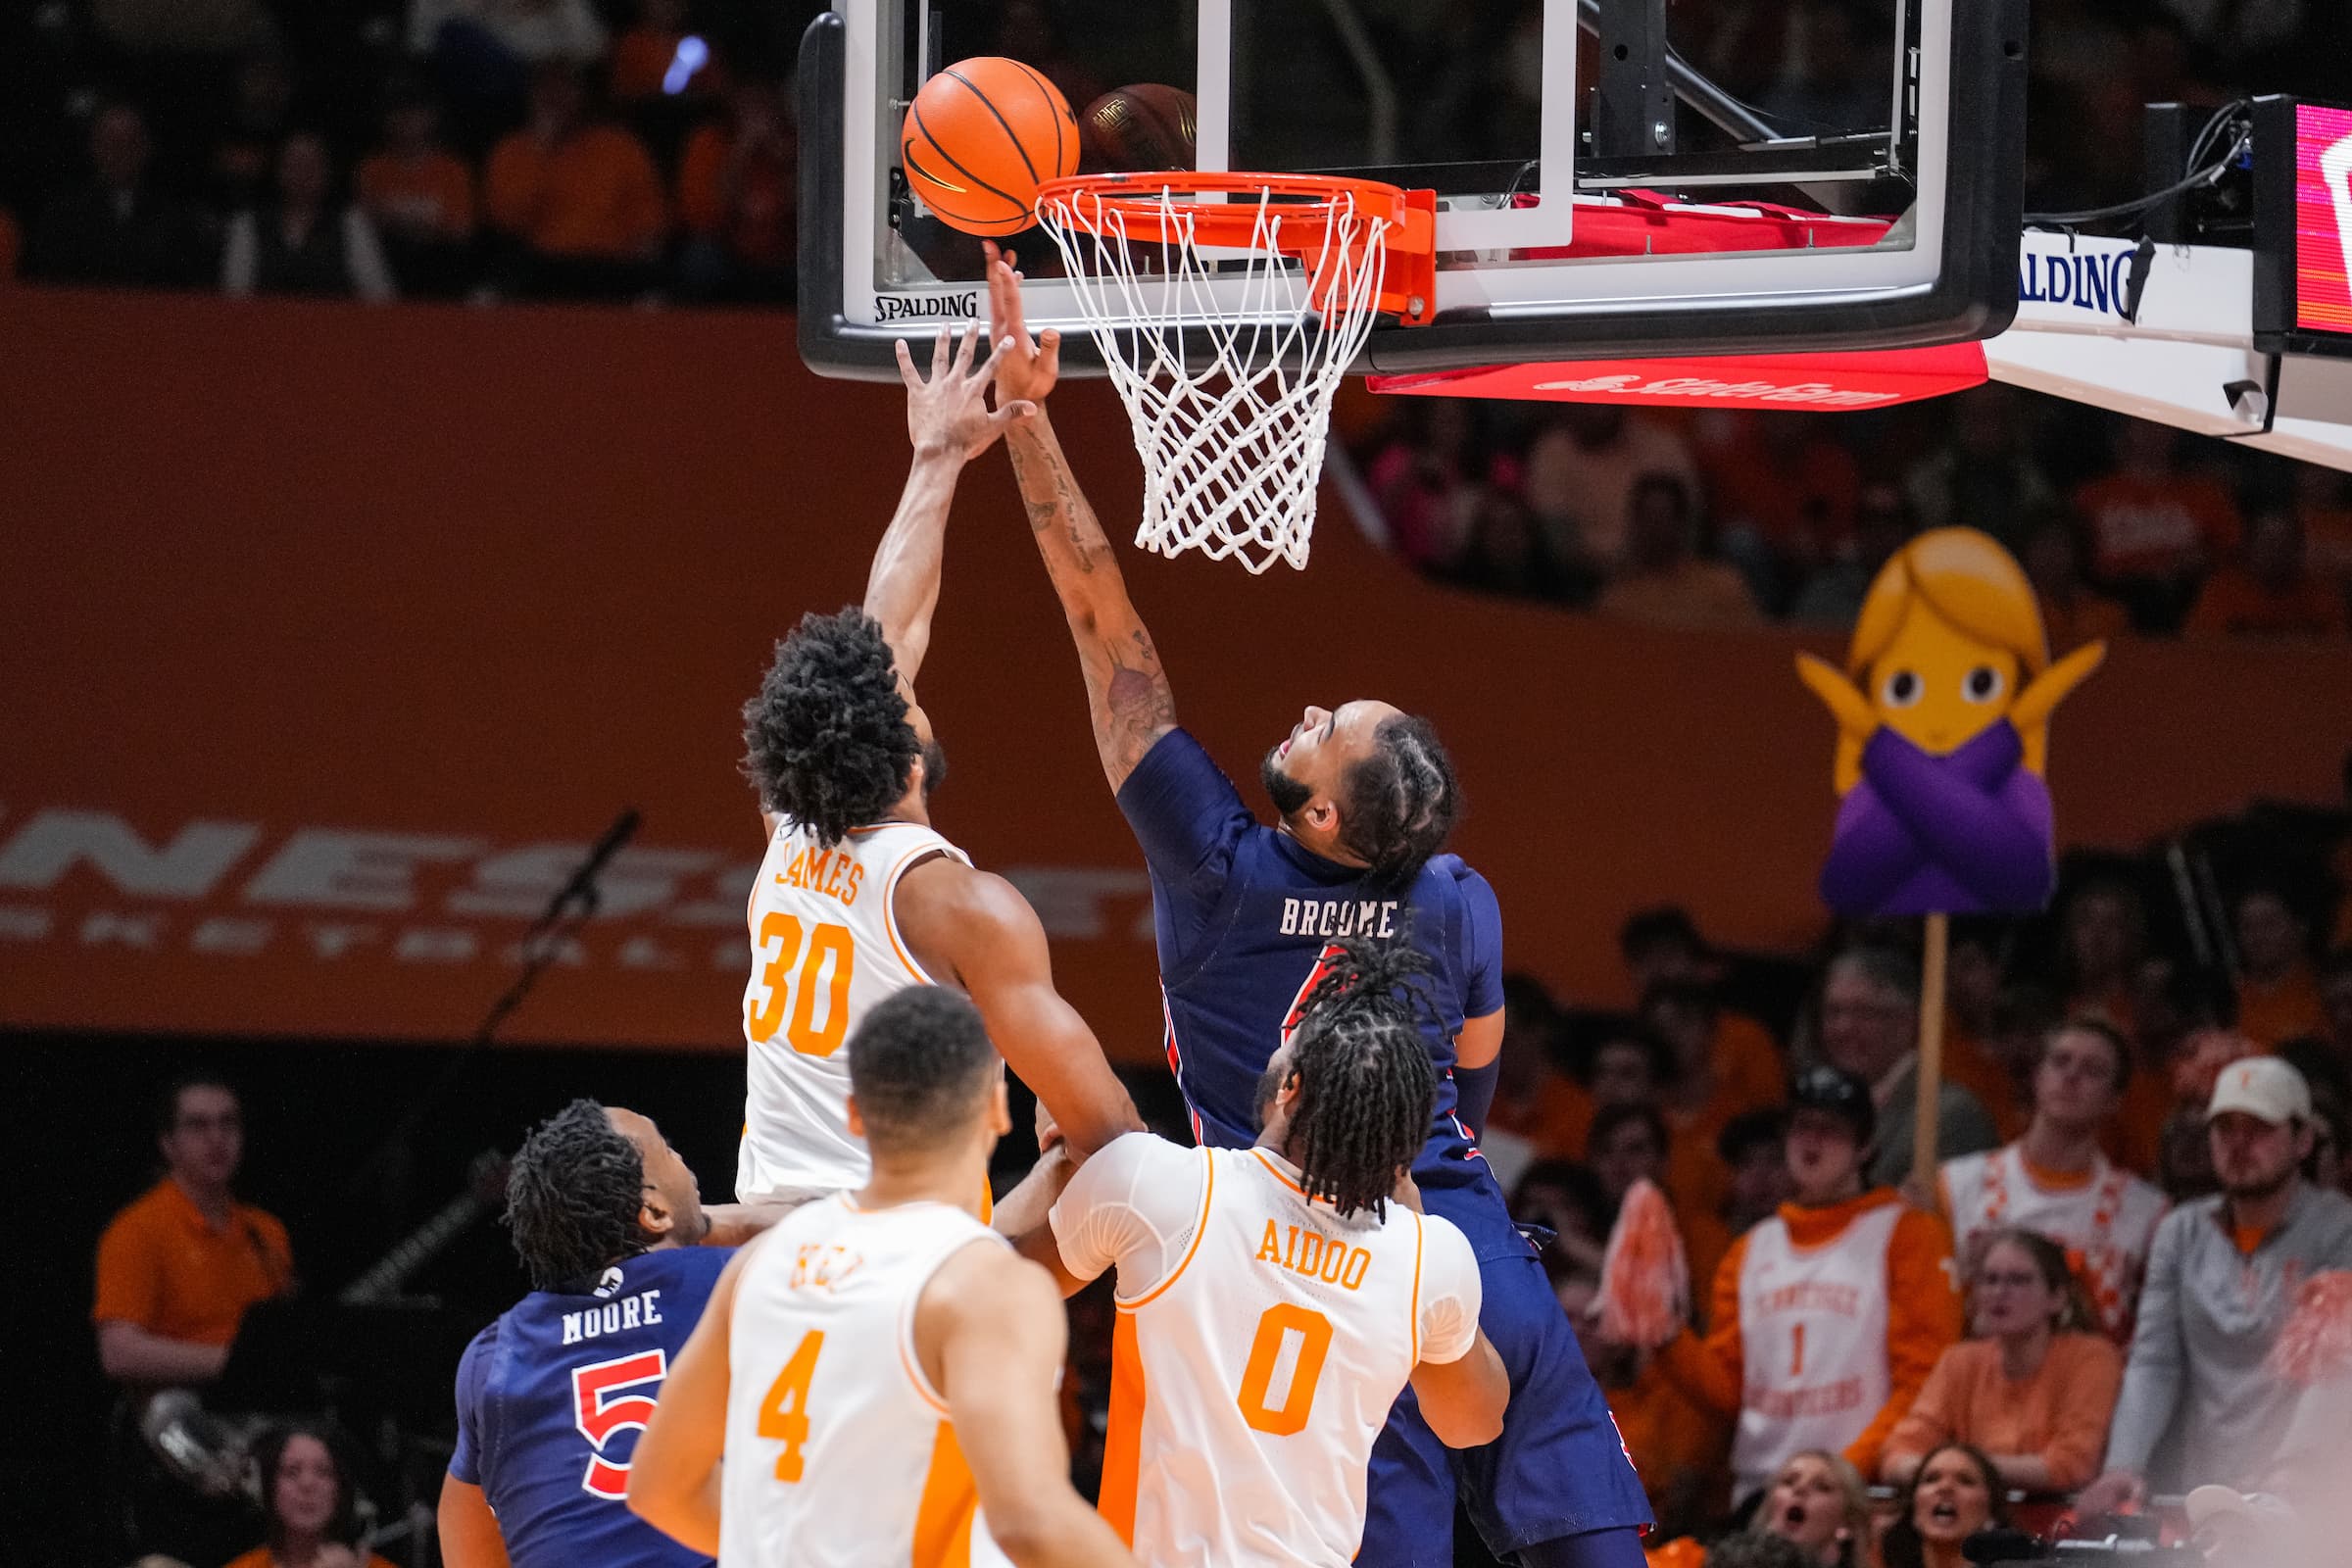 Johni Broome (4) during the game between The Tennessee Volunteers and the #25 Auburn Tigers at Thompson-Boling Arena in Knoxville, TN on Saturday, Feb 4, 2023.